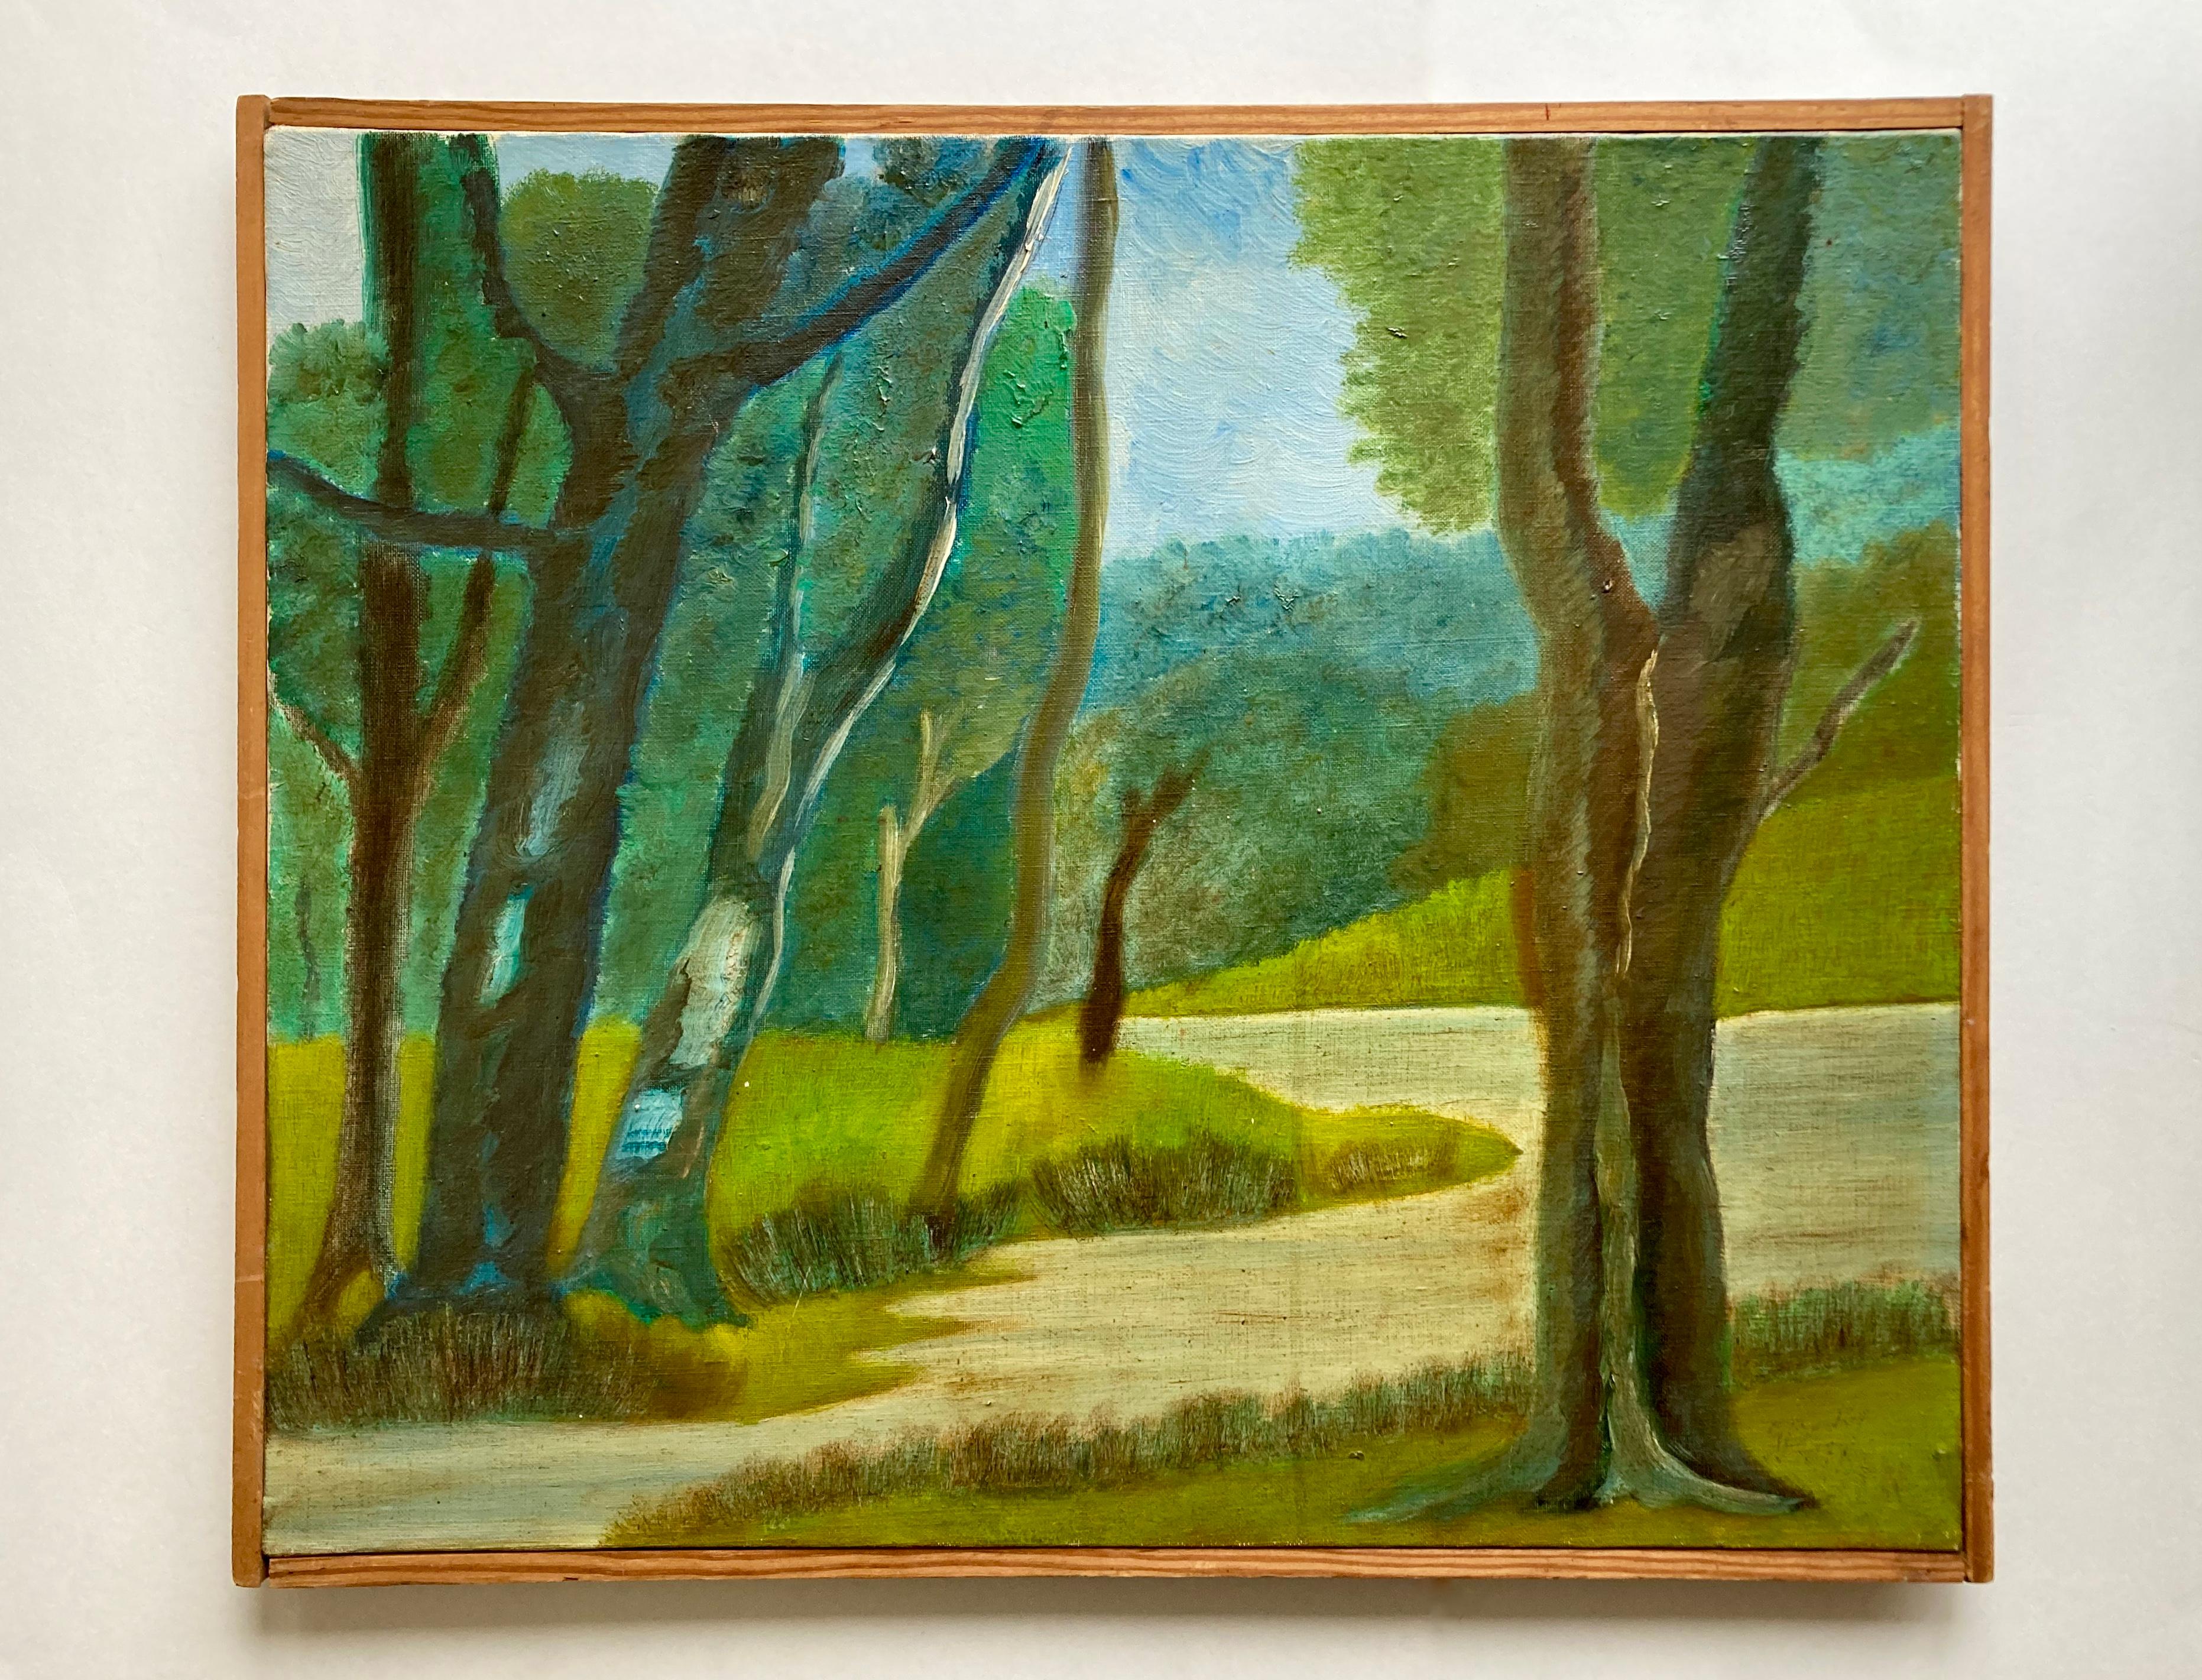 A lush and harmouneous, vintage painting from the 1970s that feels surprisingly modern and timeless. This original oil painting on stretched canvas has been sourced in France. Even though difficult to interpret, it has been signed and dated by the